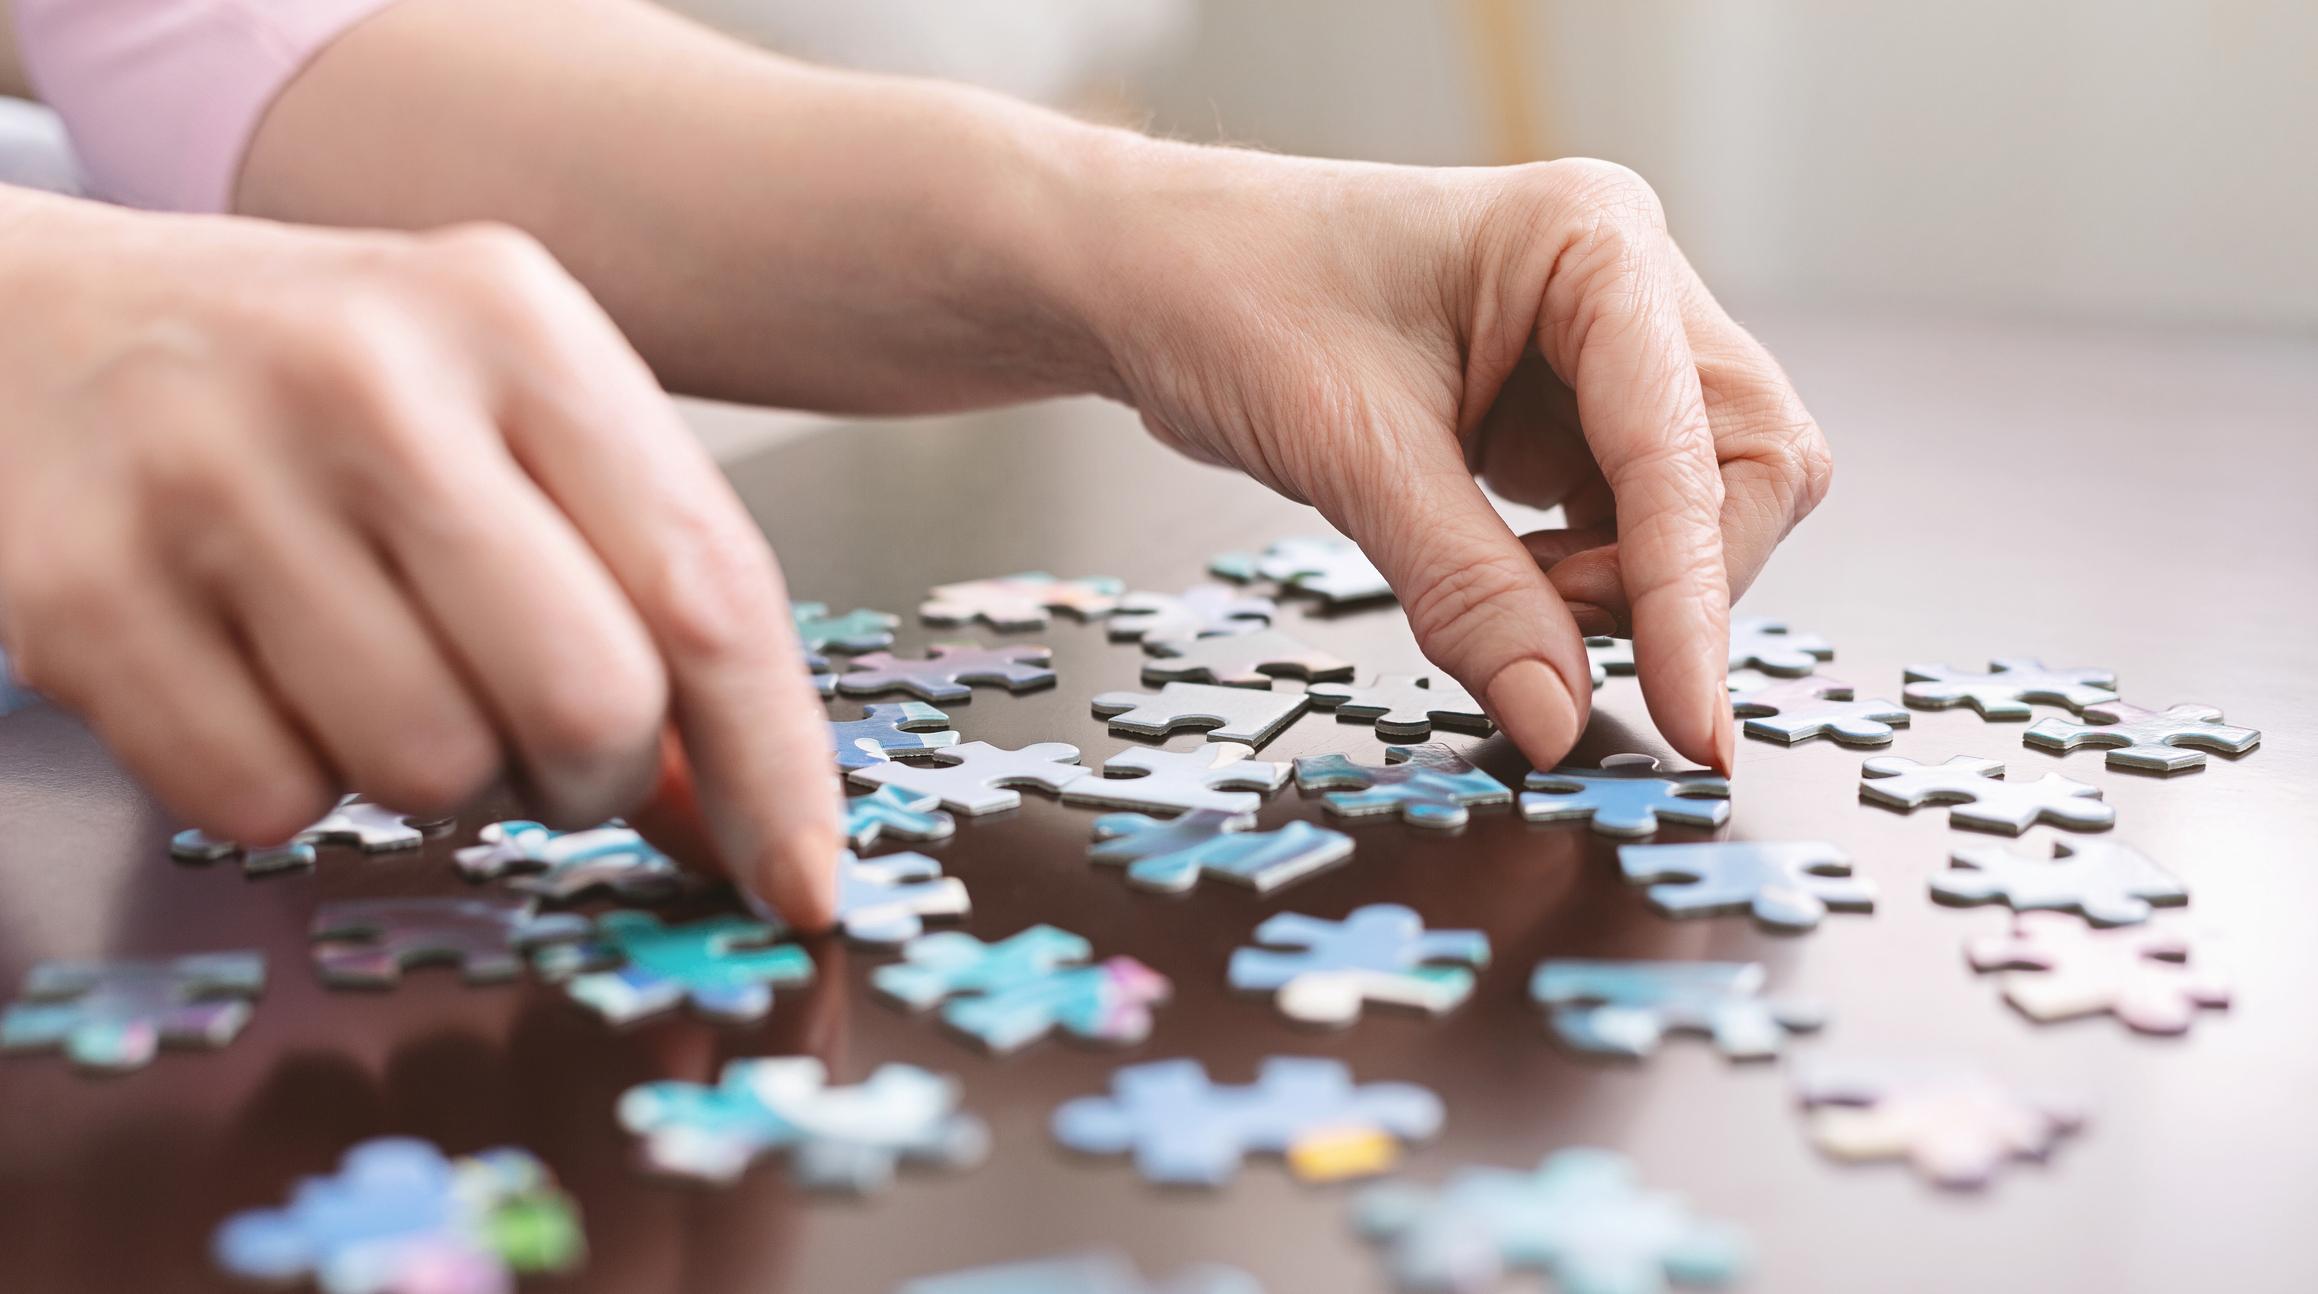 Career Pivot - Putting the puzzle pieces together